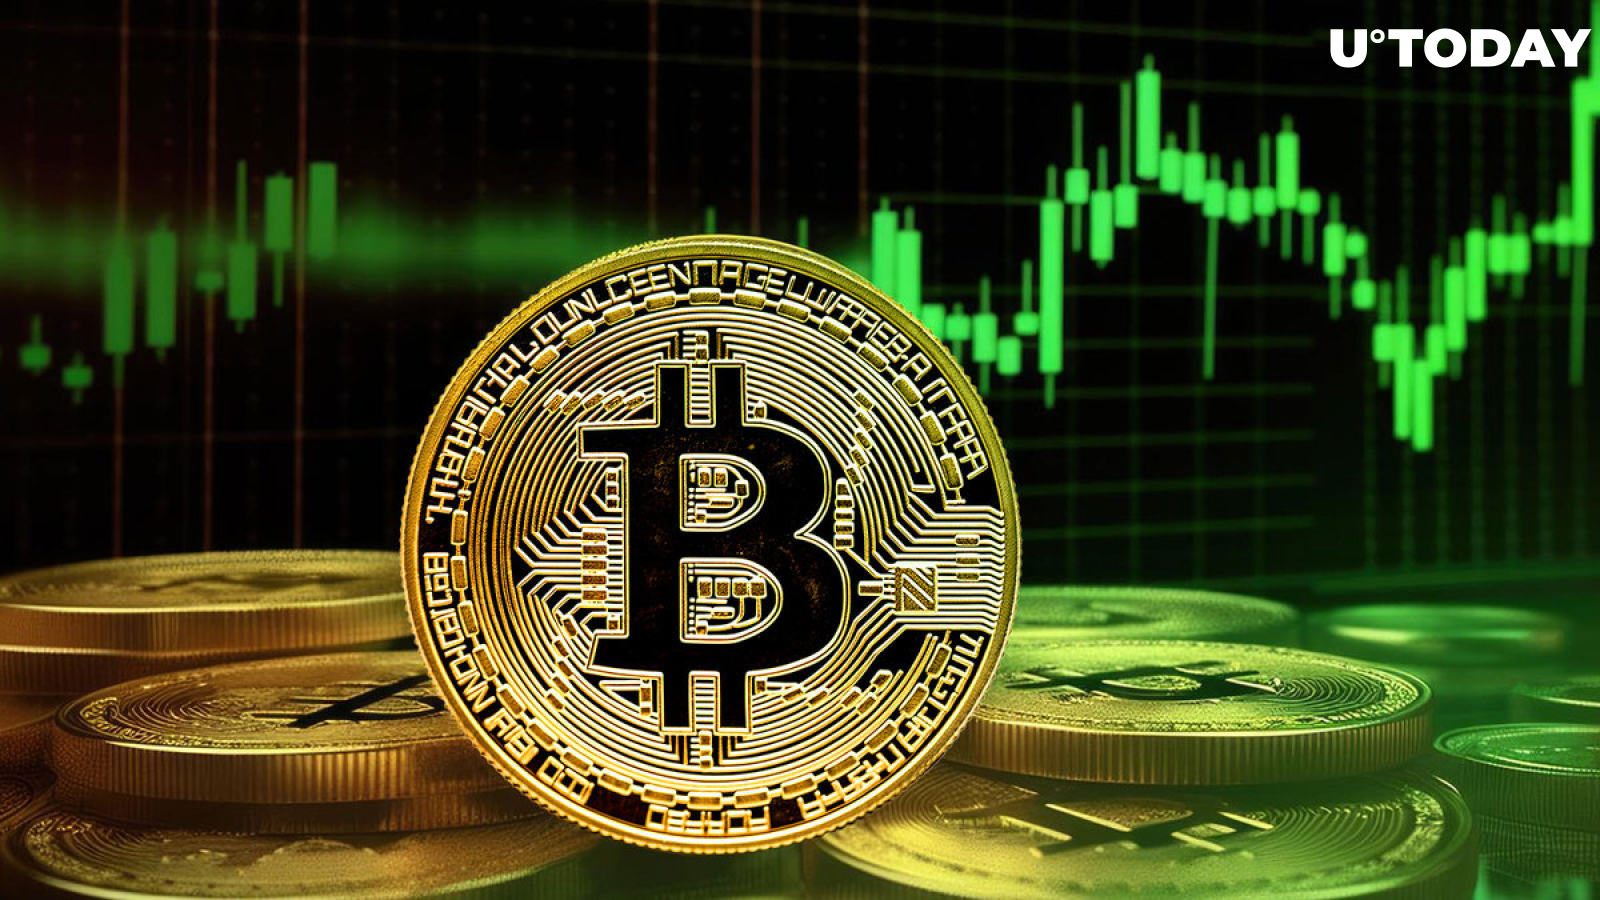 Bitcoin (BTC) Eyes $40,000 as It Heads for Fourth Green Week in Row